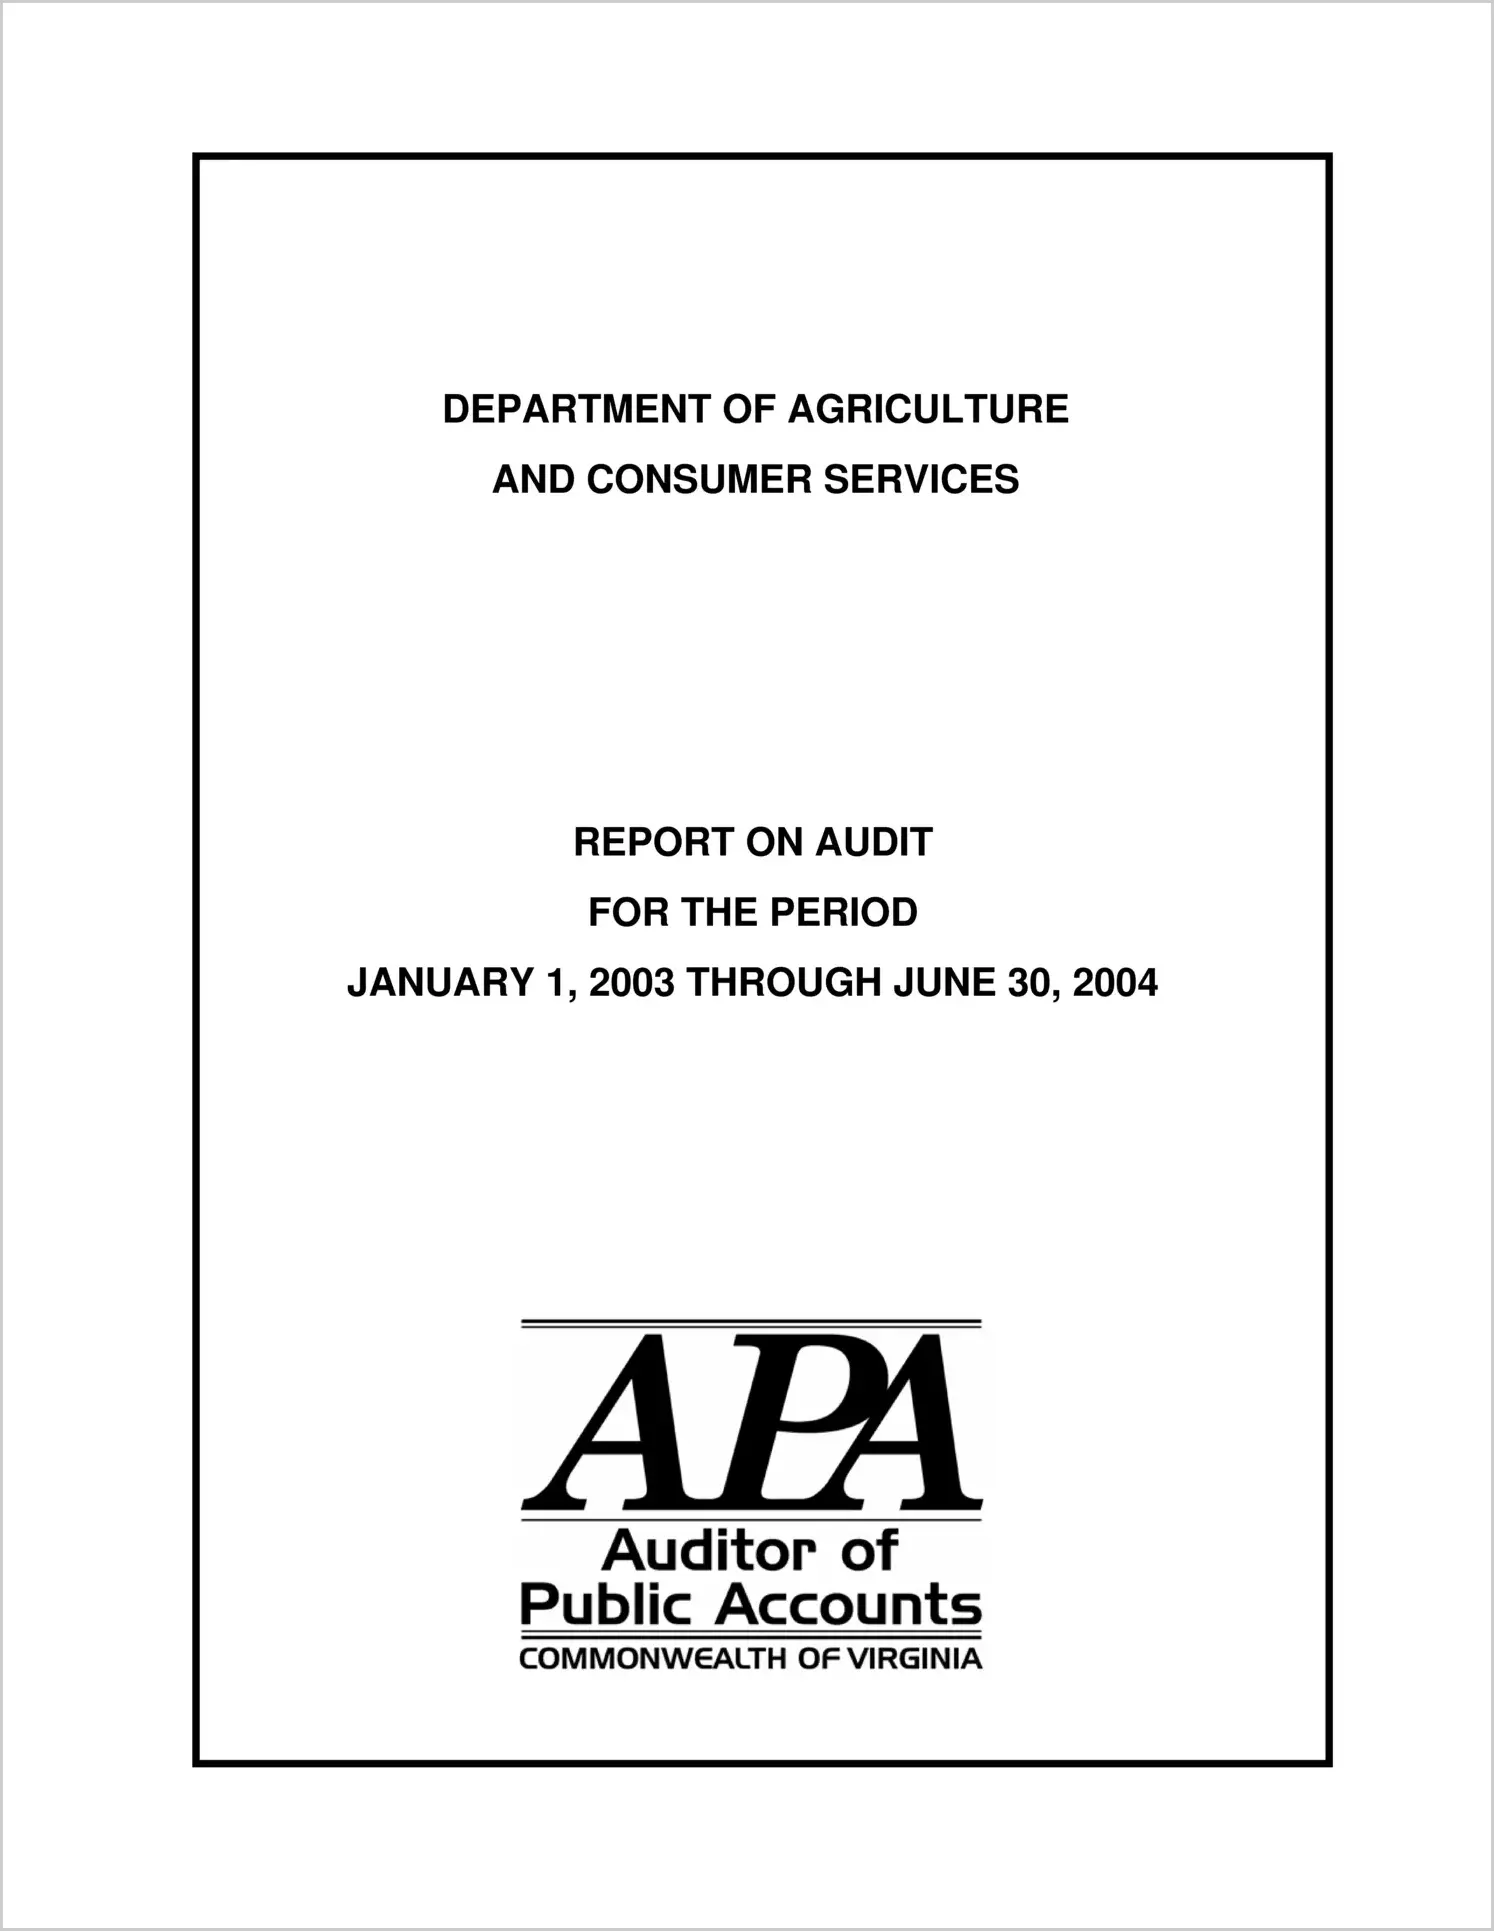 Department of Agriculture and Consumer Services for the period January 1, 2003 through June 30, 2004